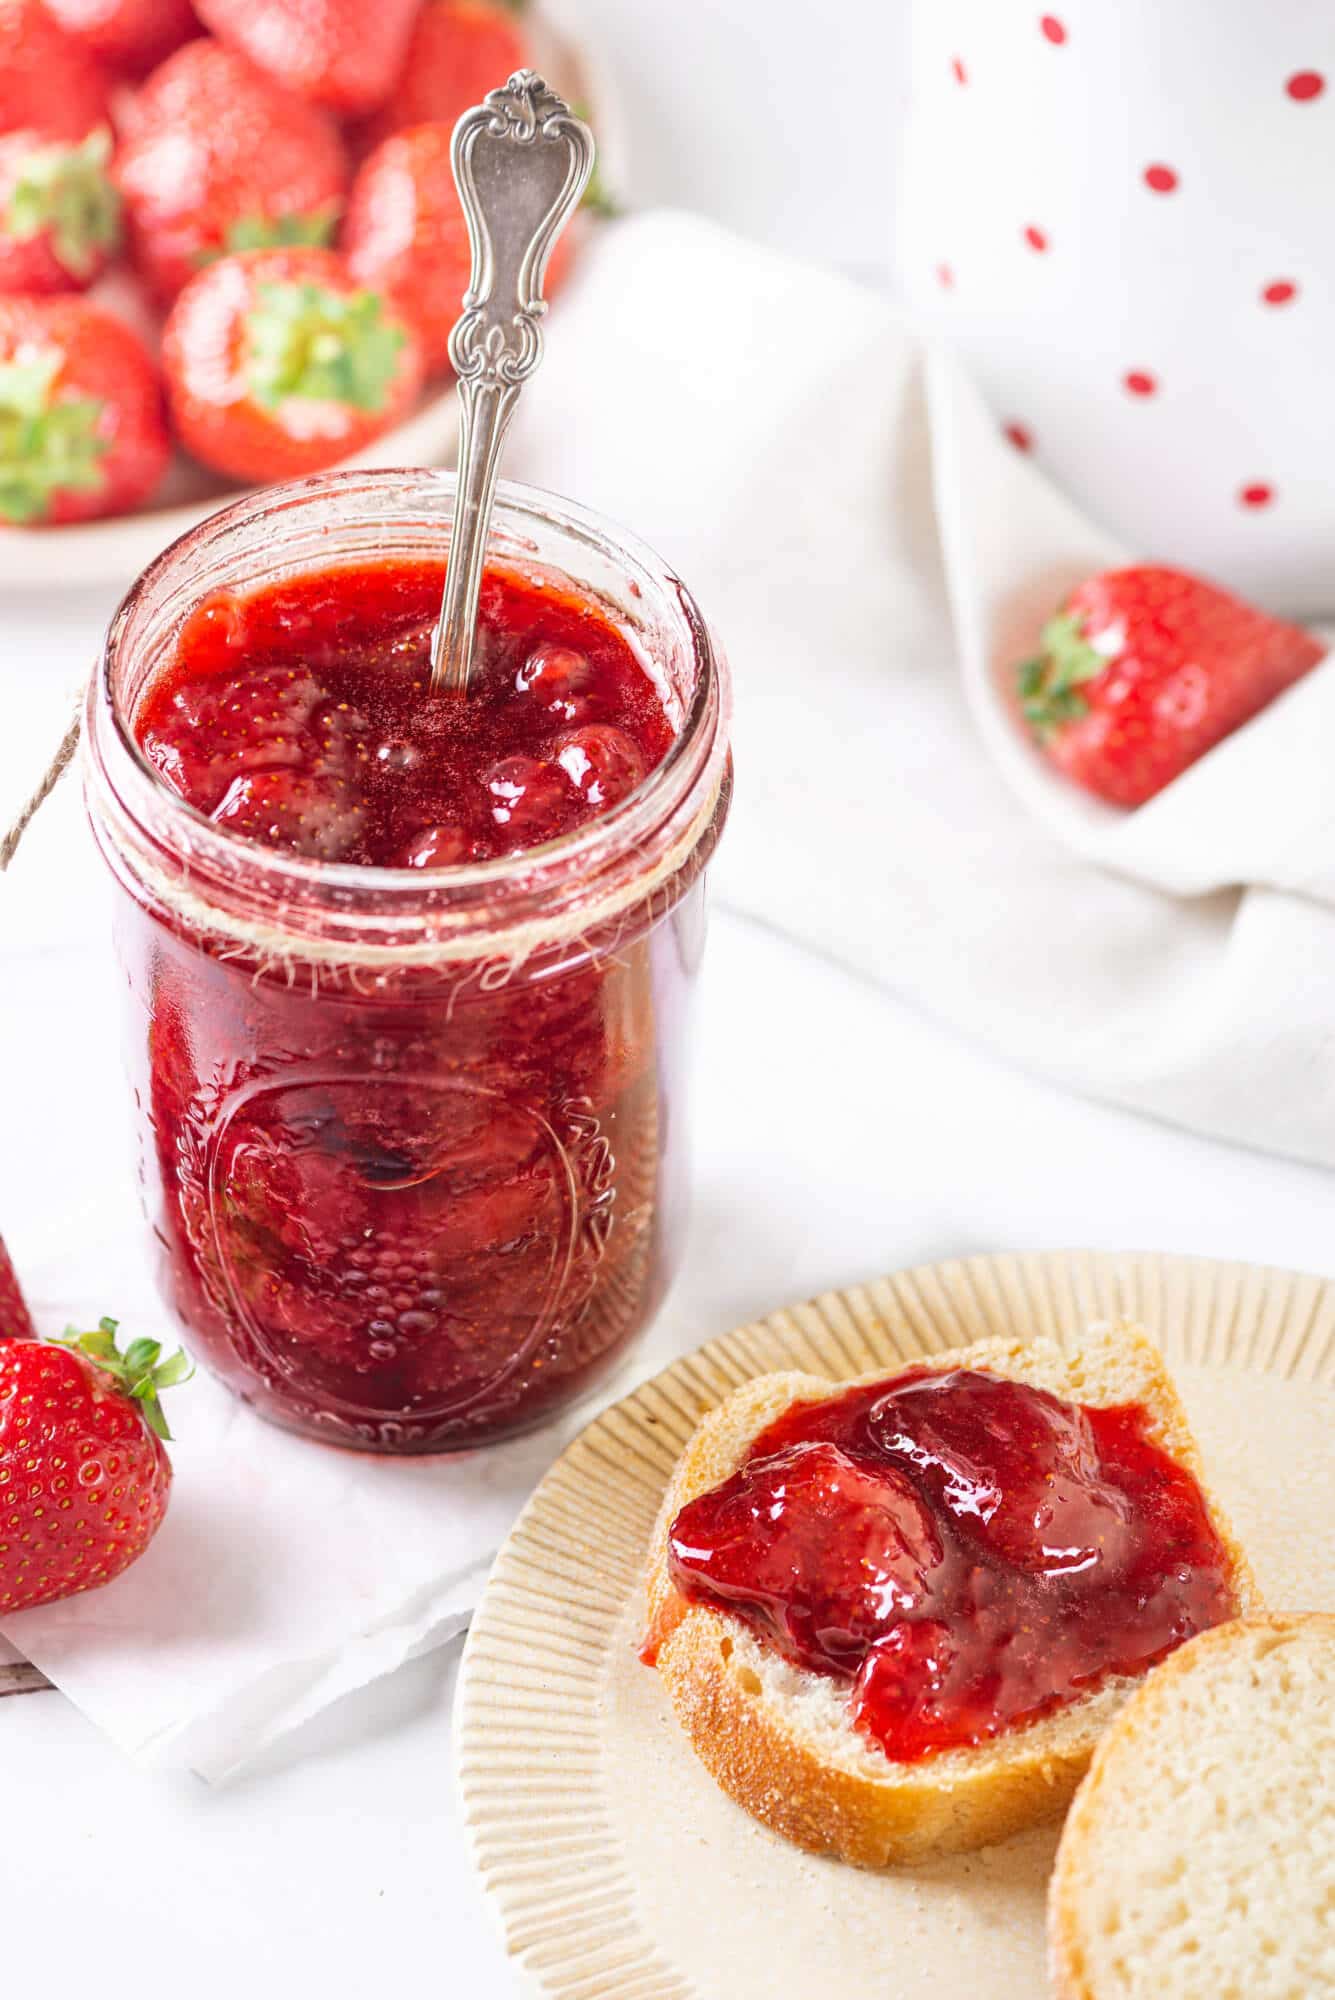 strwaberry-jam-in-a-jar-with-a-spoon-with-toast-on-a-plate-with-jam-on-it-and-strawberries-in-the-background